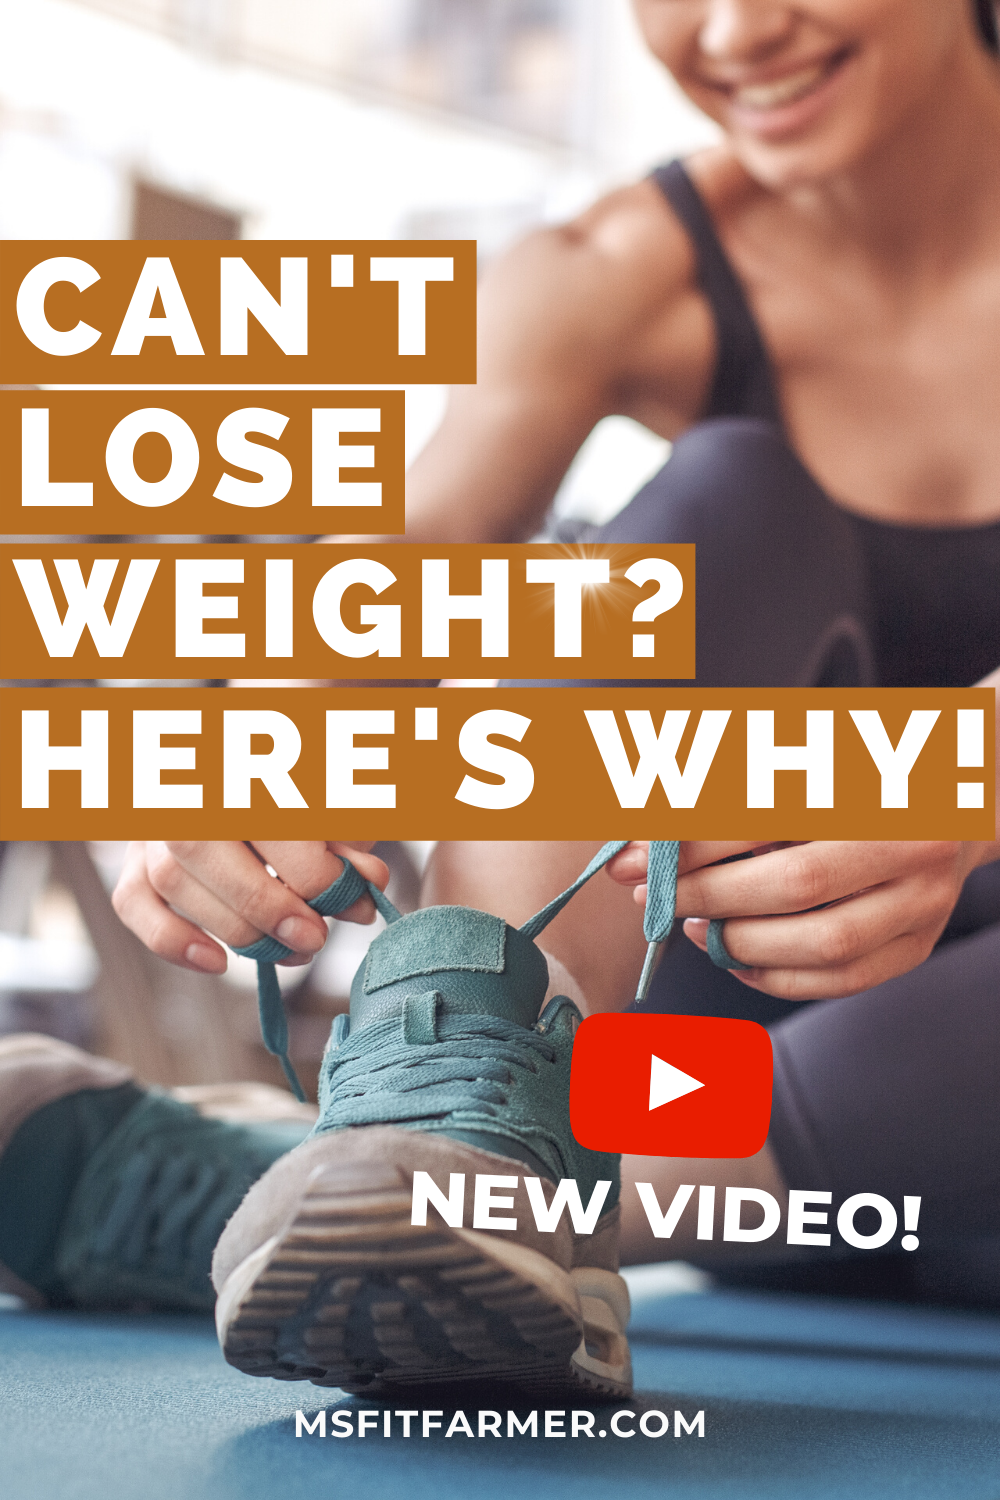 3 Reasons Why ‘You Can't Lose Weight' And How-To Fix It! - 3 Reasons Why ‘You Can't Lose Weight' And How-To Fix It! -   19 fitness Lifestyle you are ideas